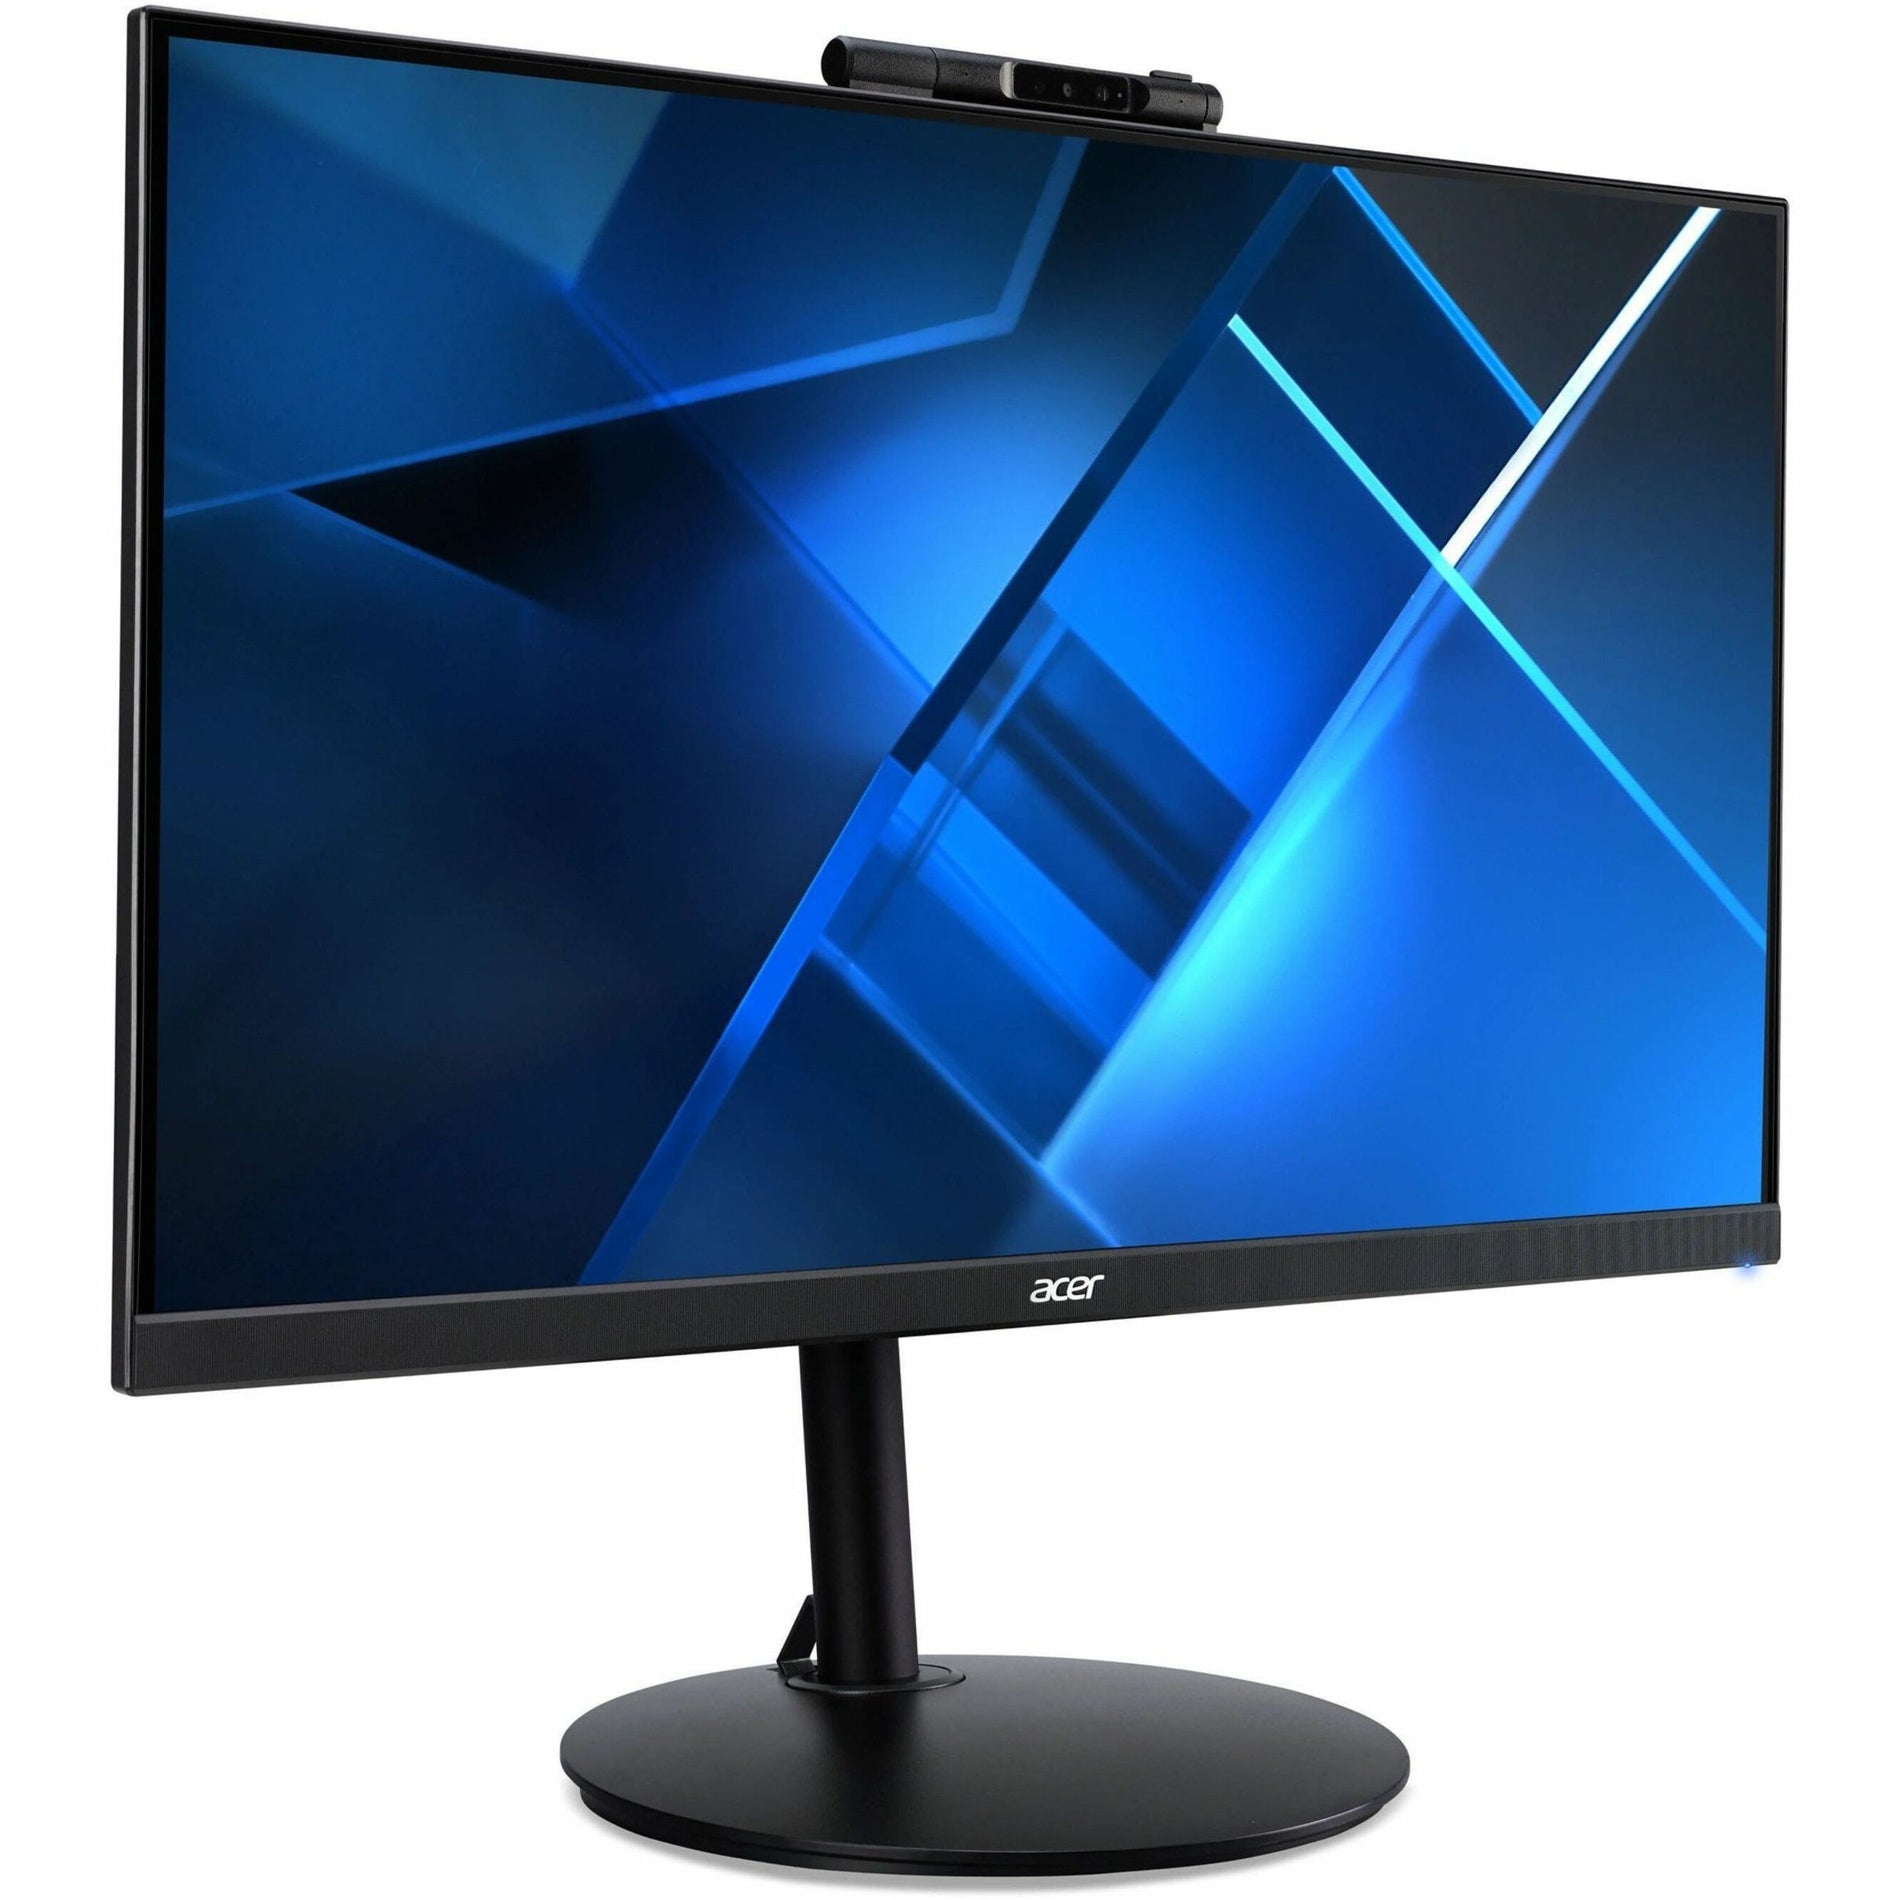 Acer UM.HB2AA.D01 CB272 D Widescreen LCD Monitor, 27" Full HD, 1ms Response Time, FreeSync, Built-in Speakers